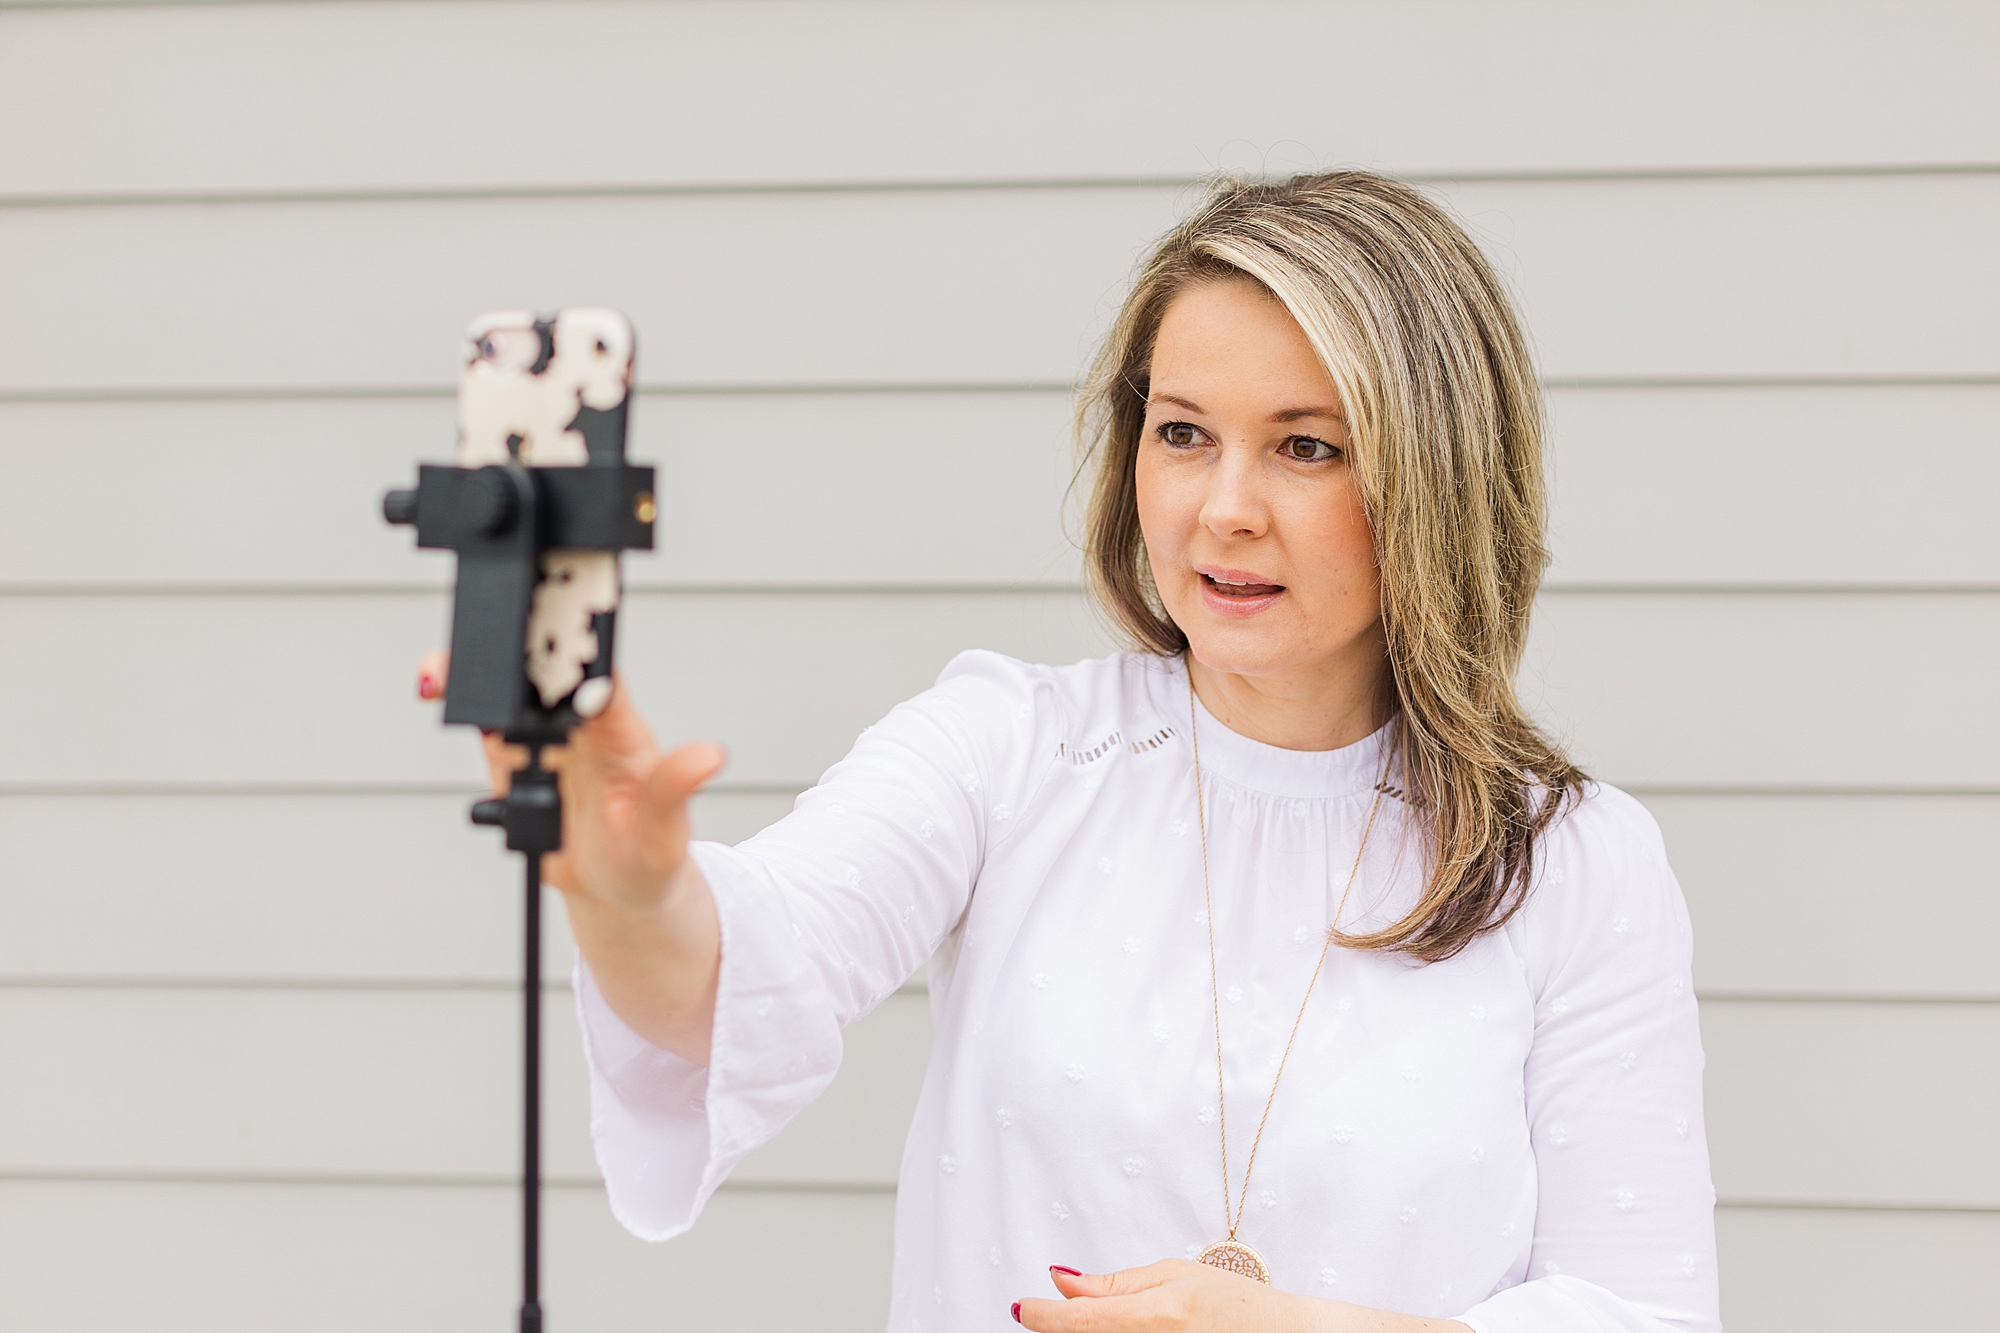 woman works with phone tripod